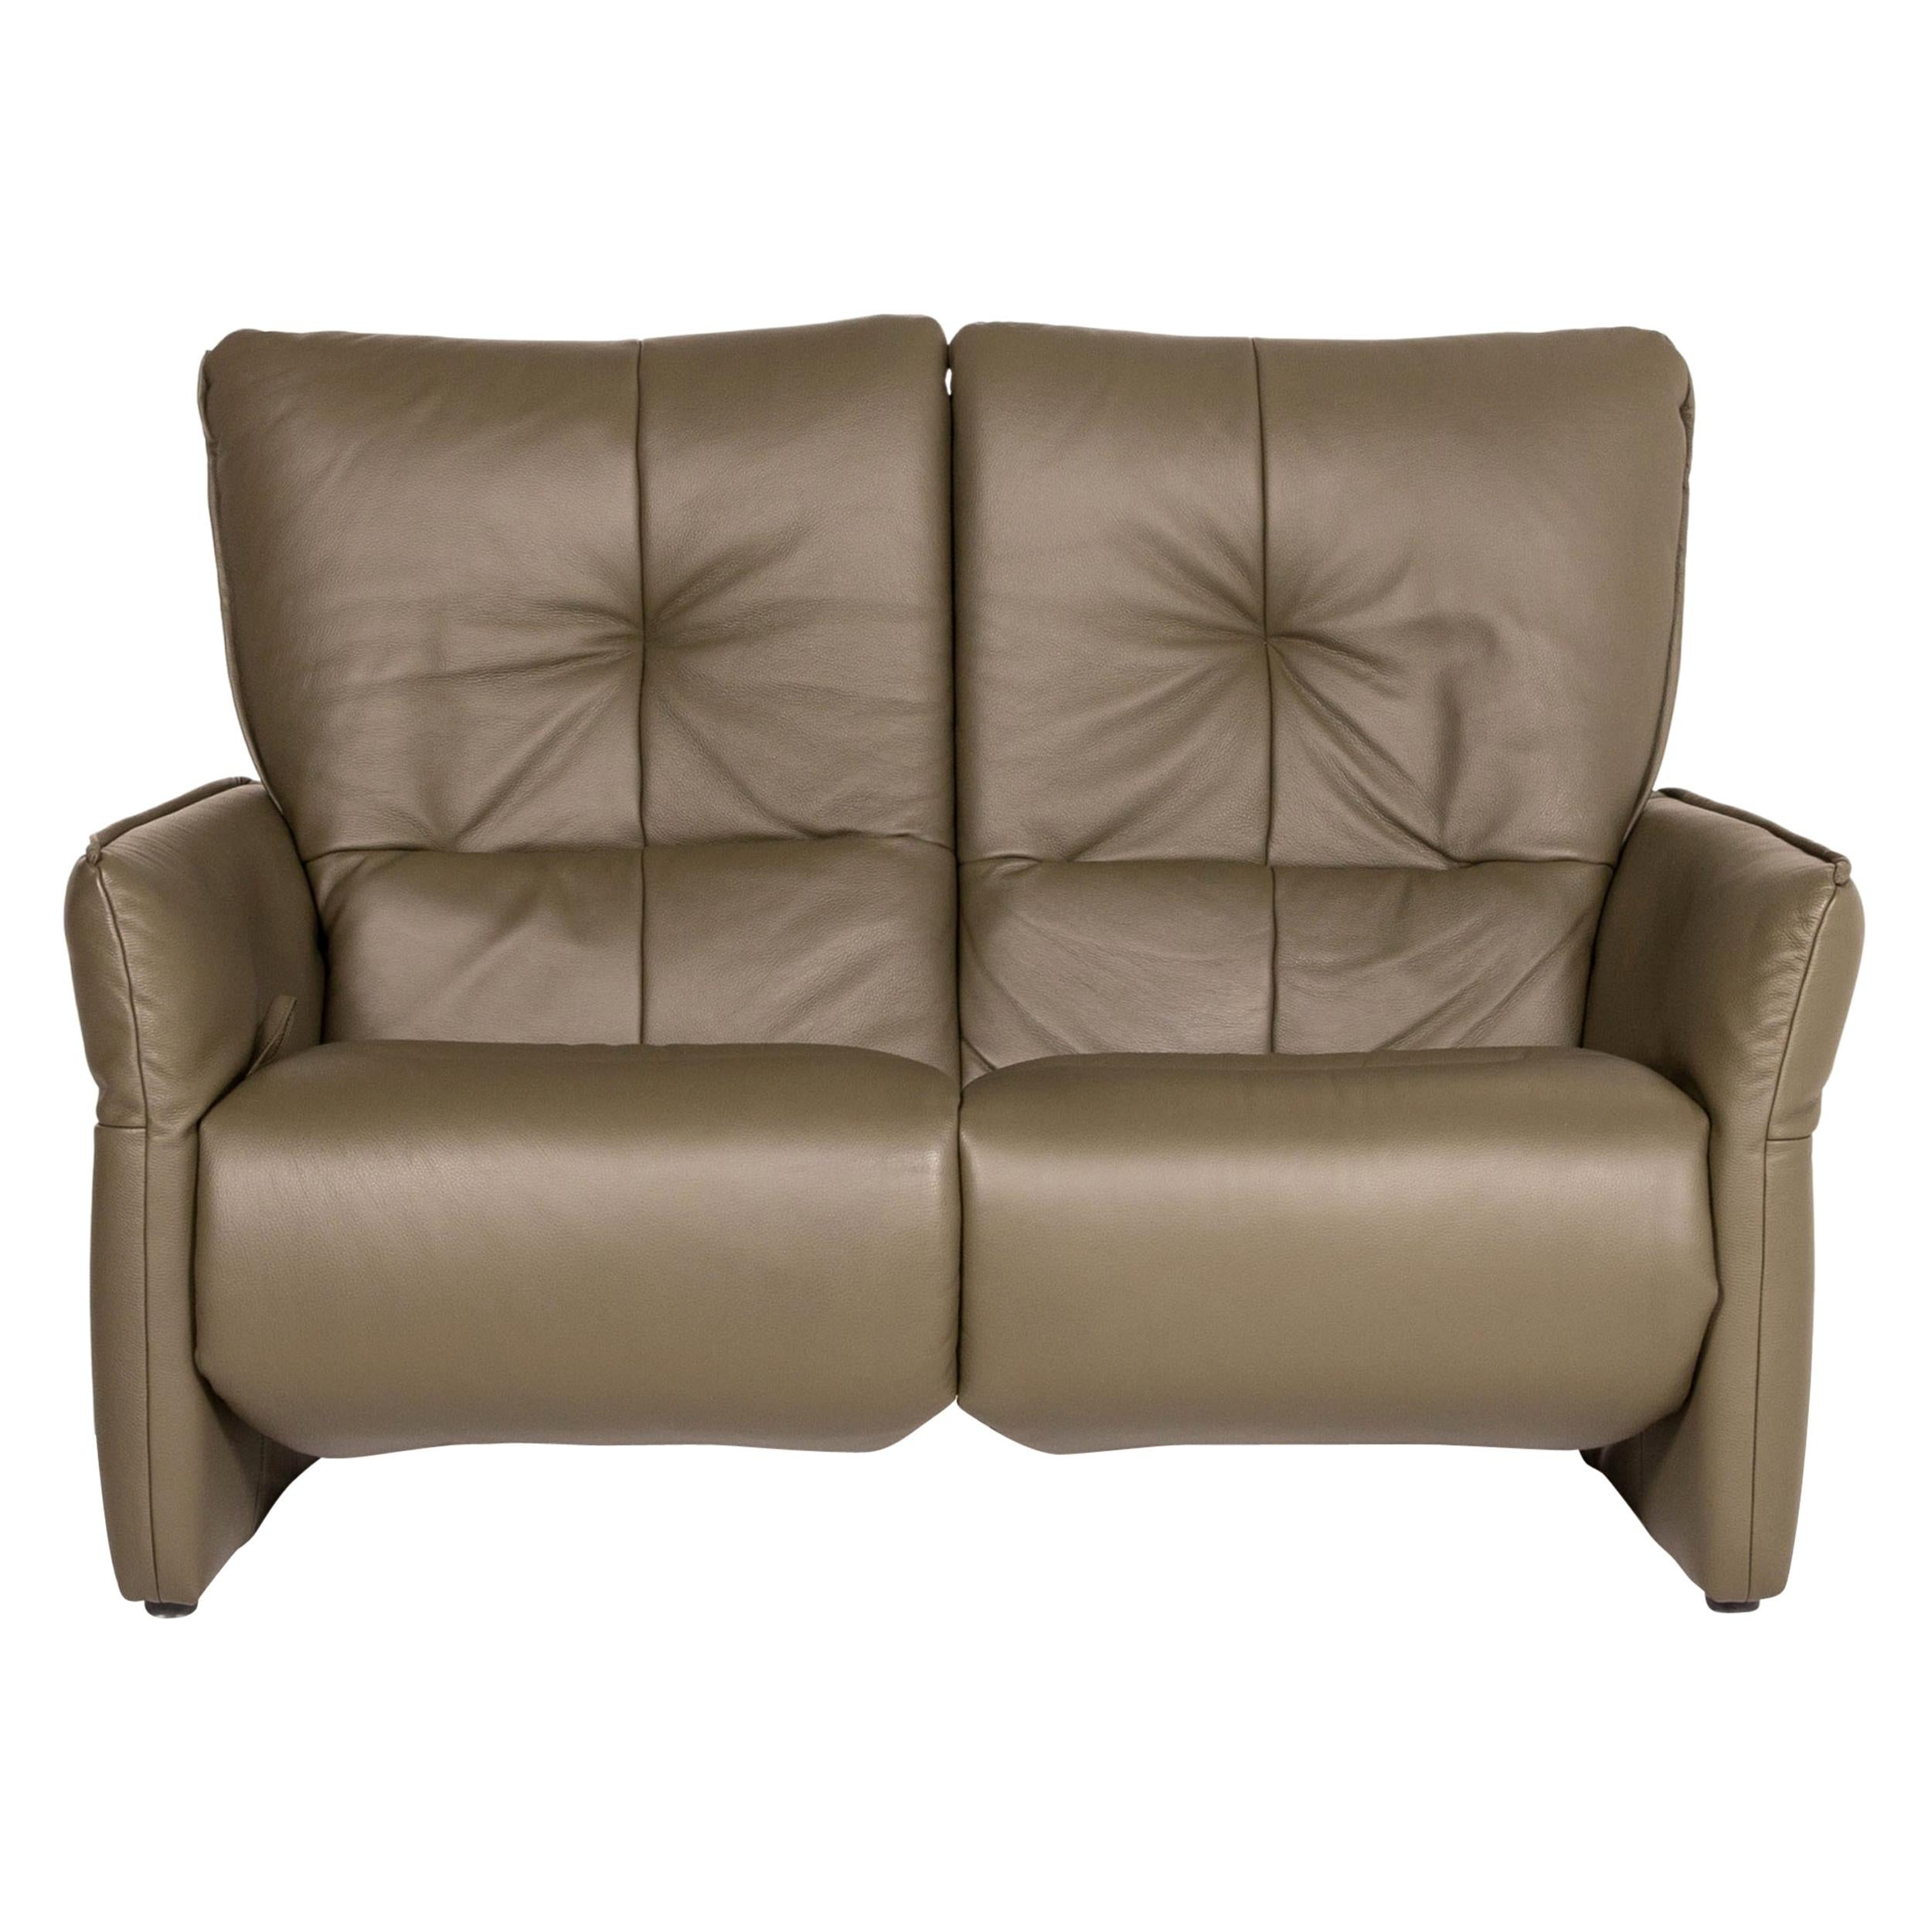 Himolla Cumuly Leather Sofa Olive Green Gray Green Two-Seater Function Relax